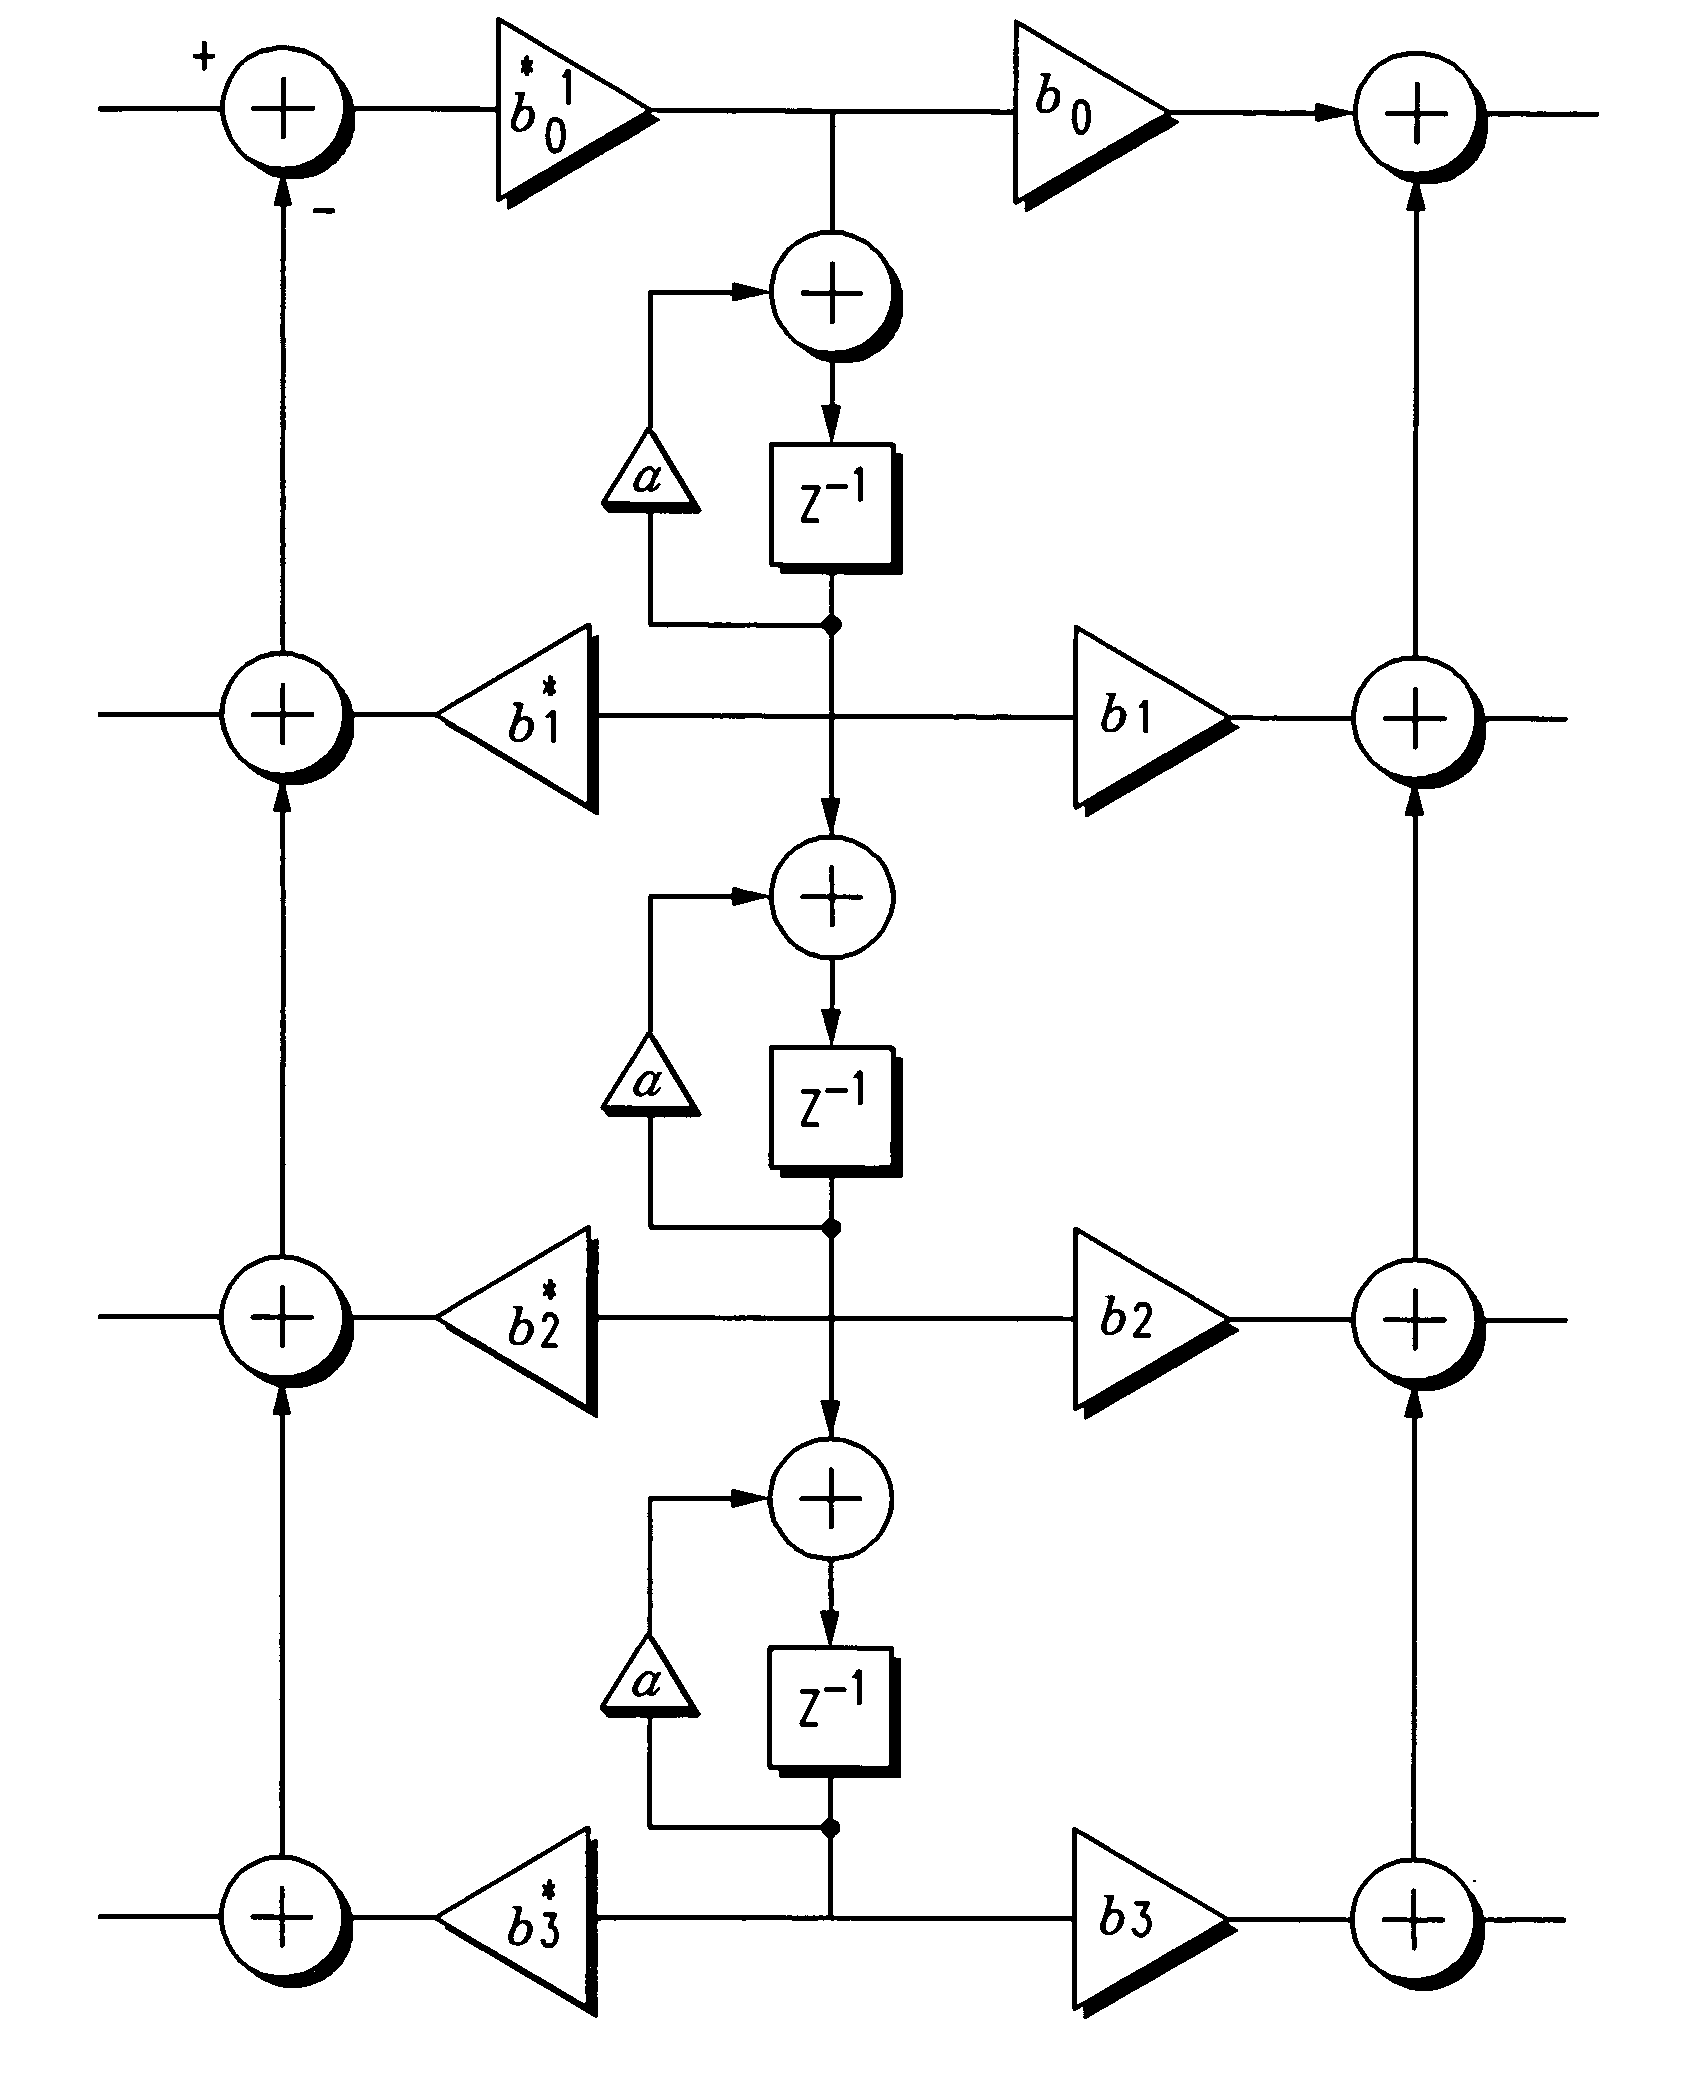 Method and apparatus for enhancing loudness of a speech signal